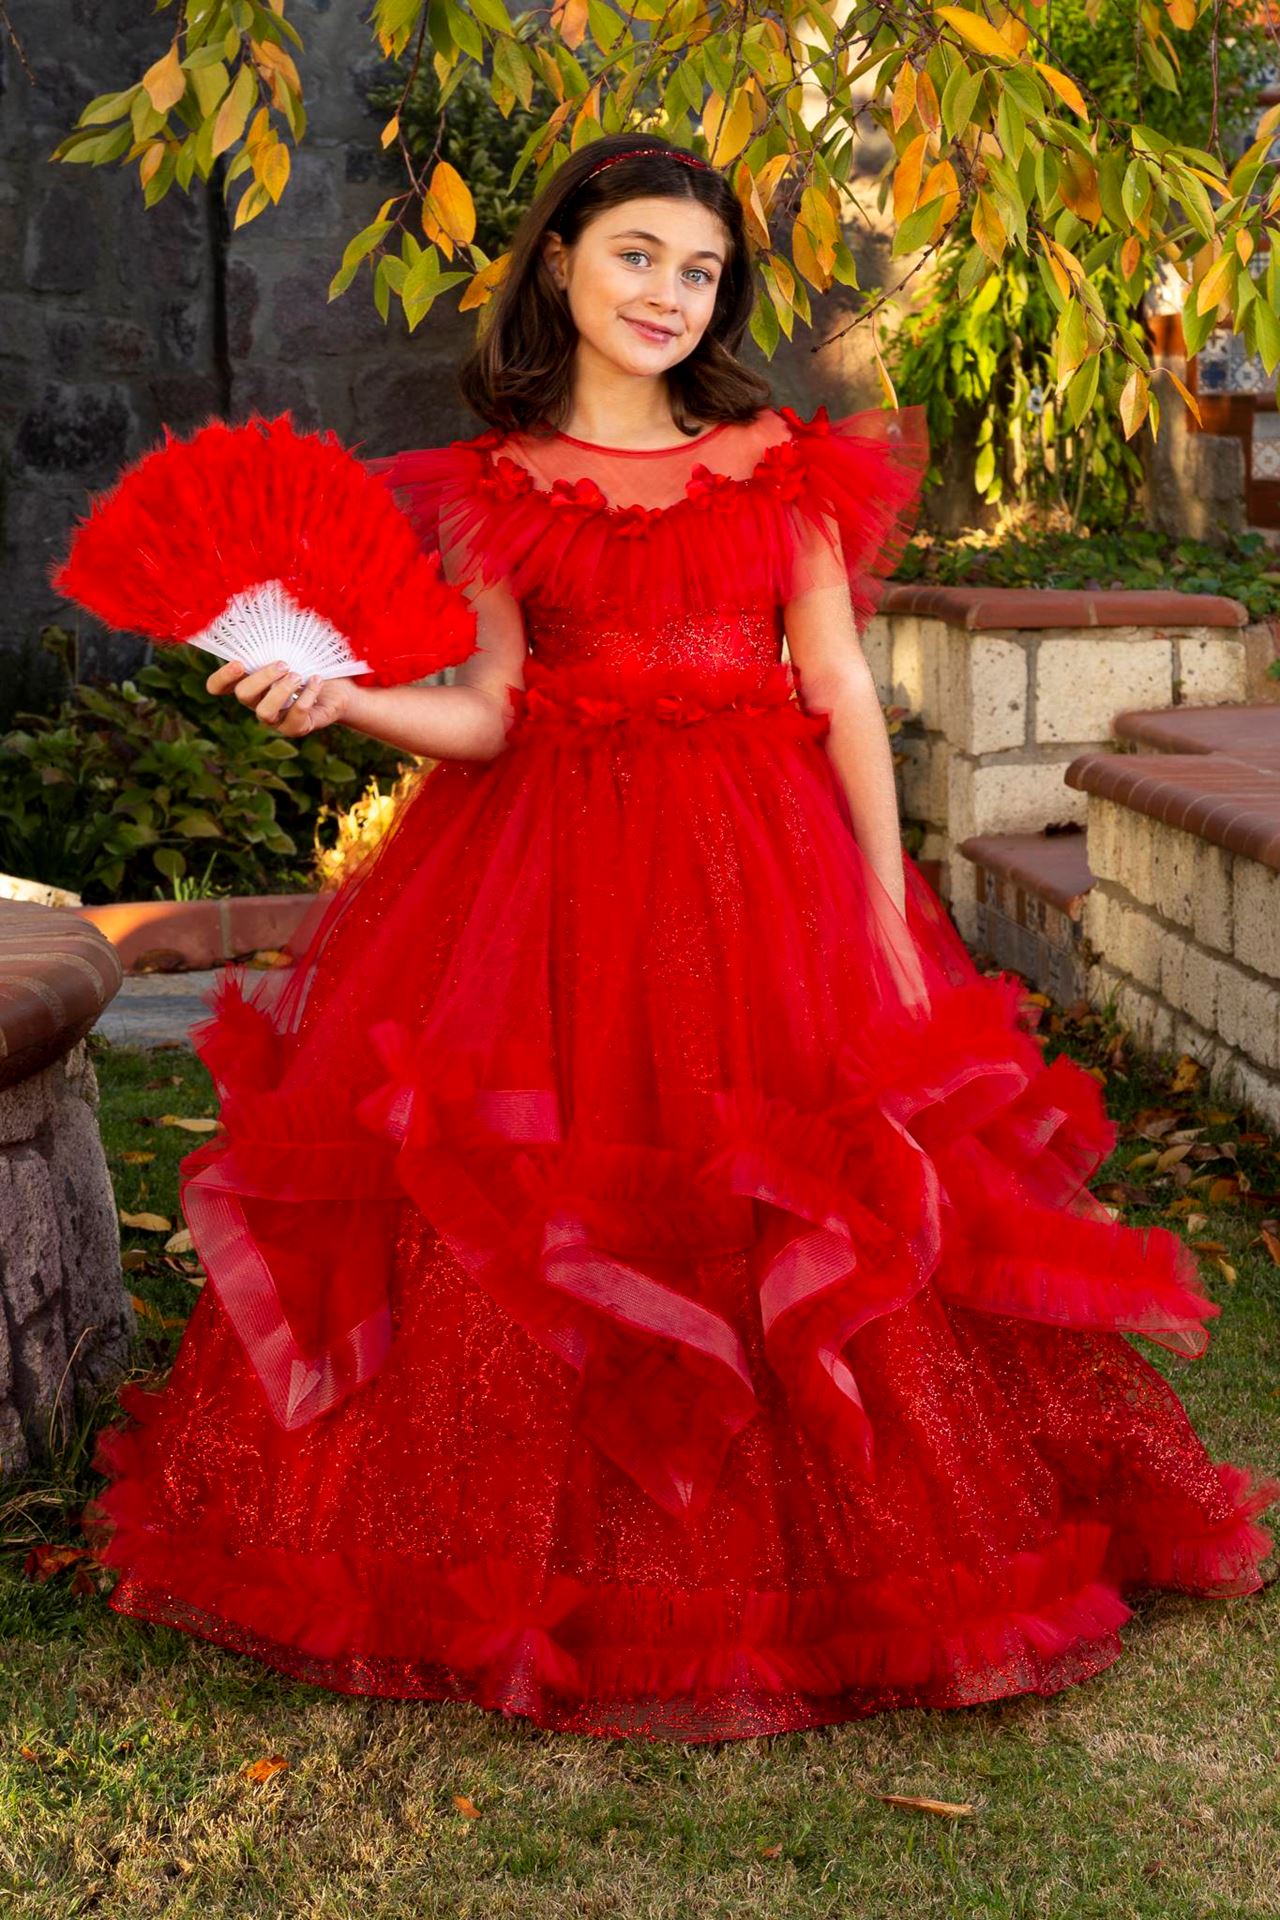 Dazzle 2-6 Years Old Girl Dress 20079 Red